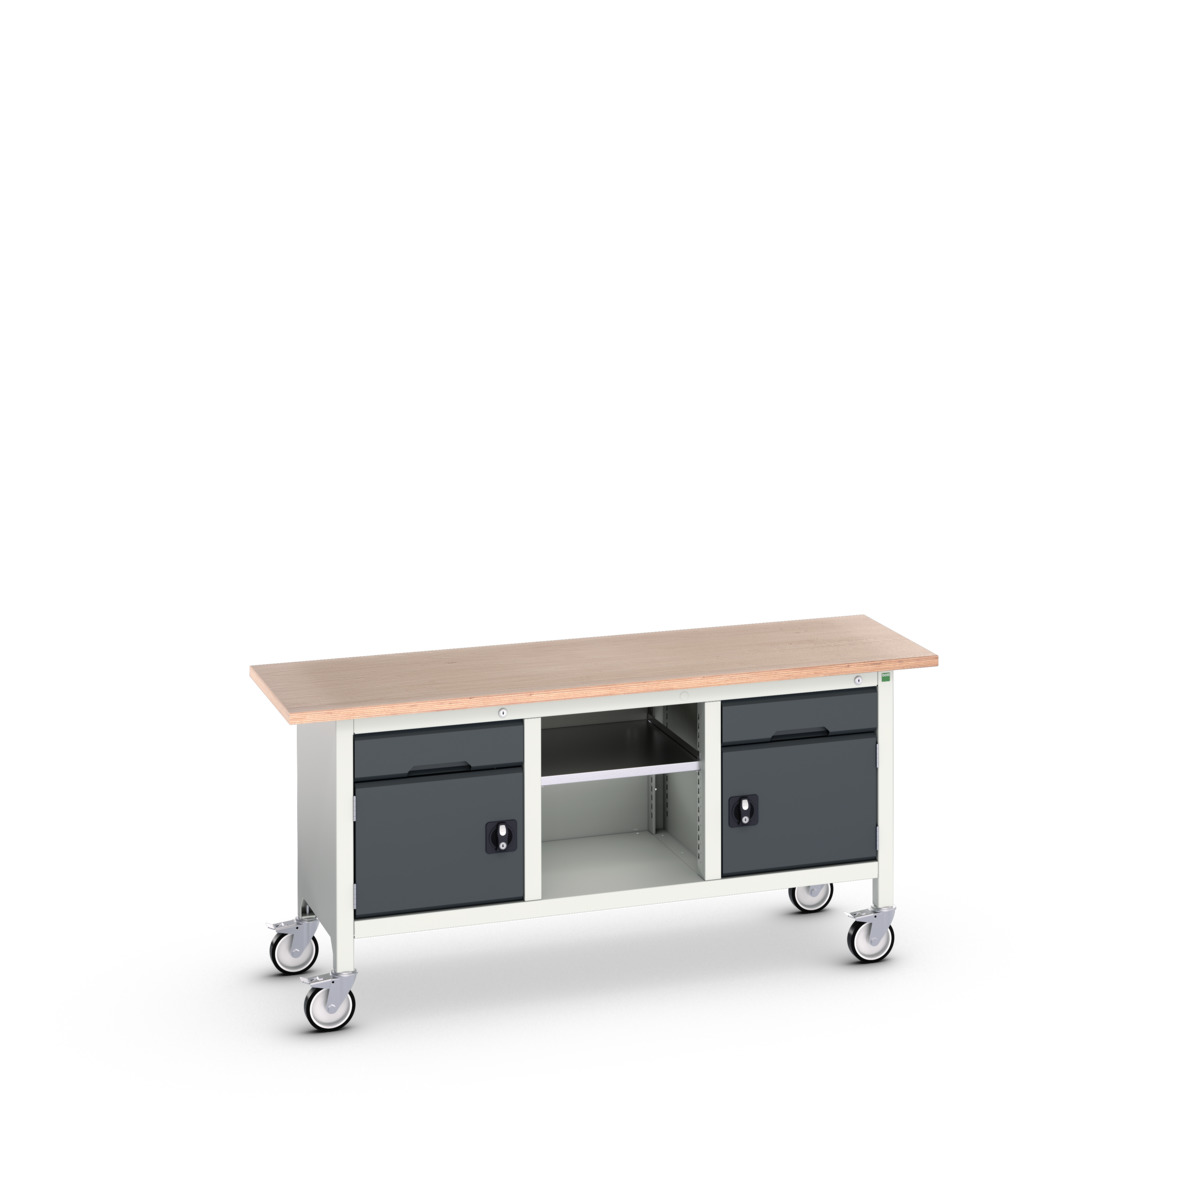 16923221. - verso mobile storage bench (mpx)